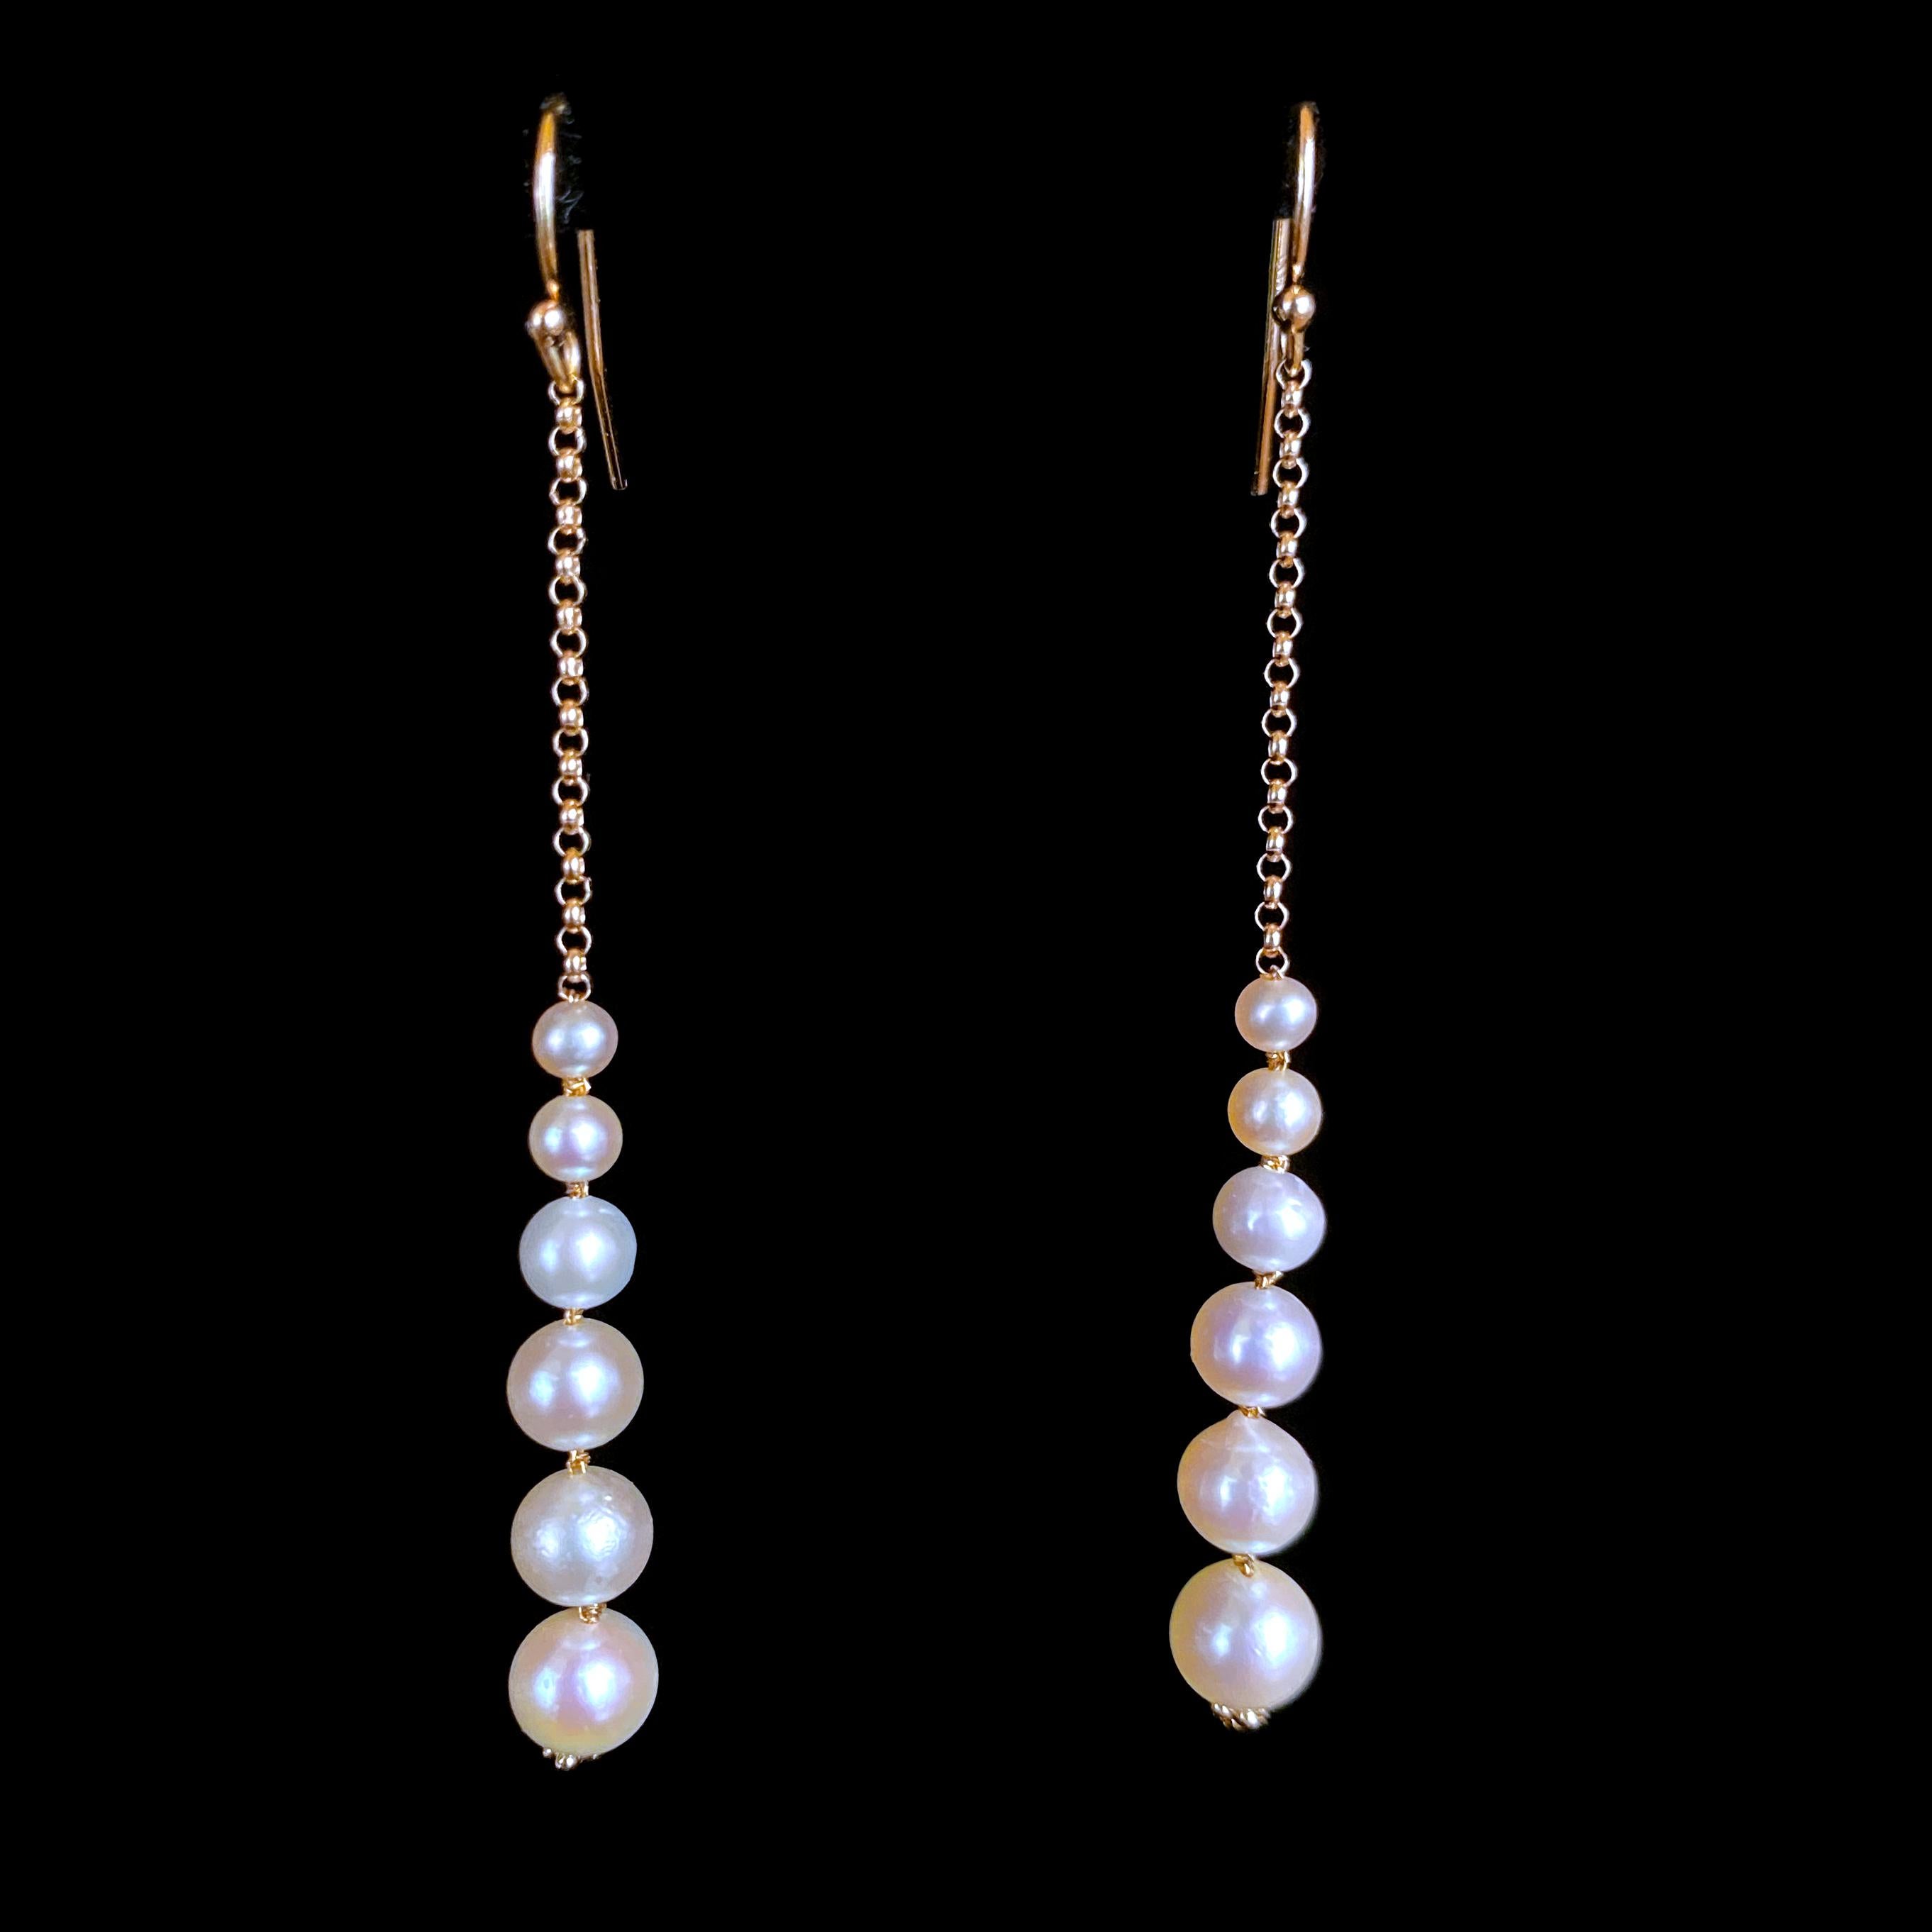 Artisan Marina J. Dangle Graduated Pearl Earrings with solid 14k Yellow Gold For Sale